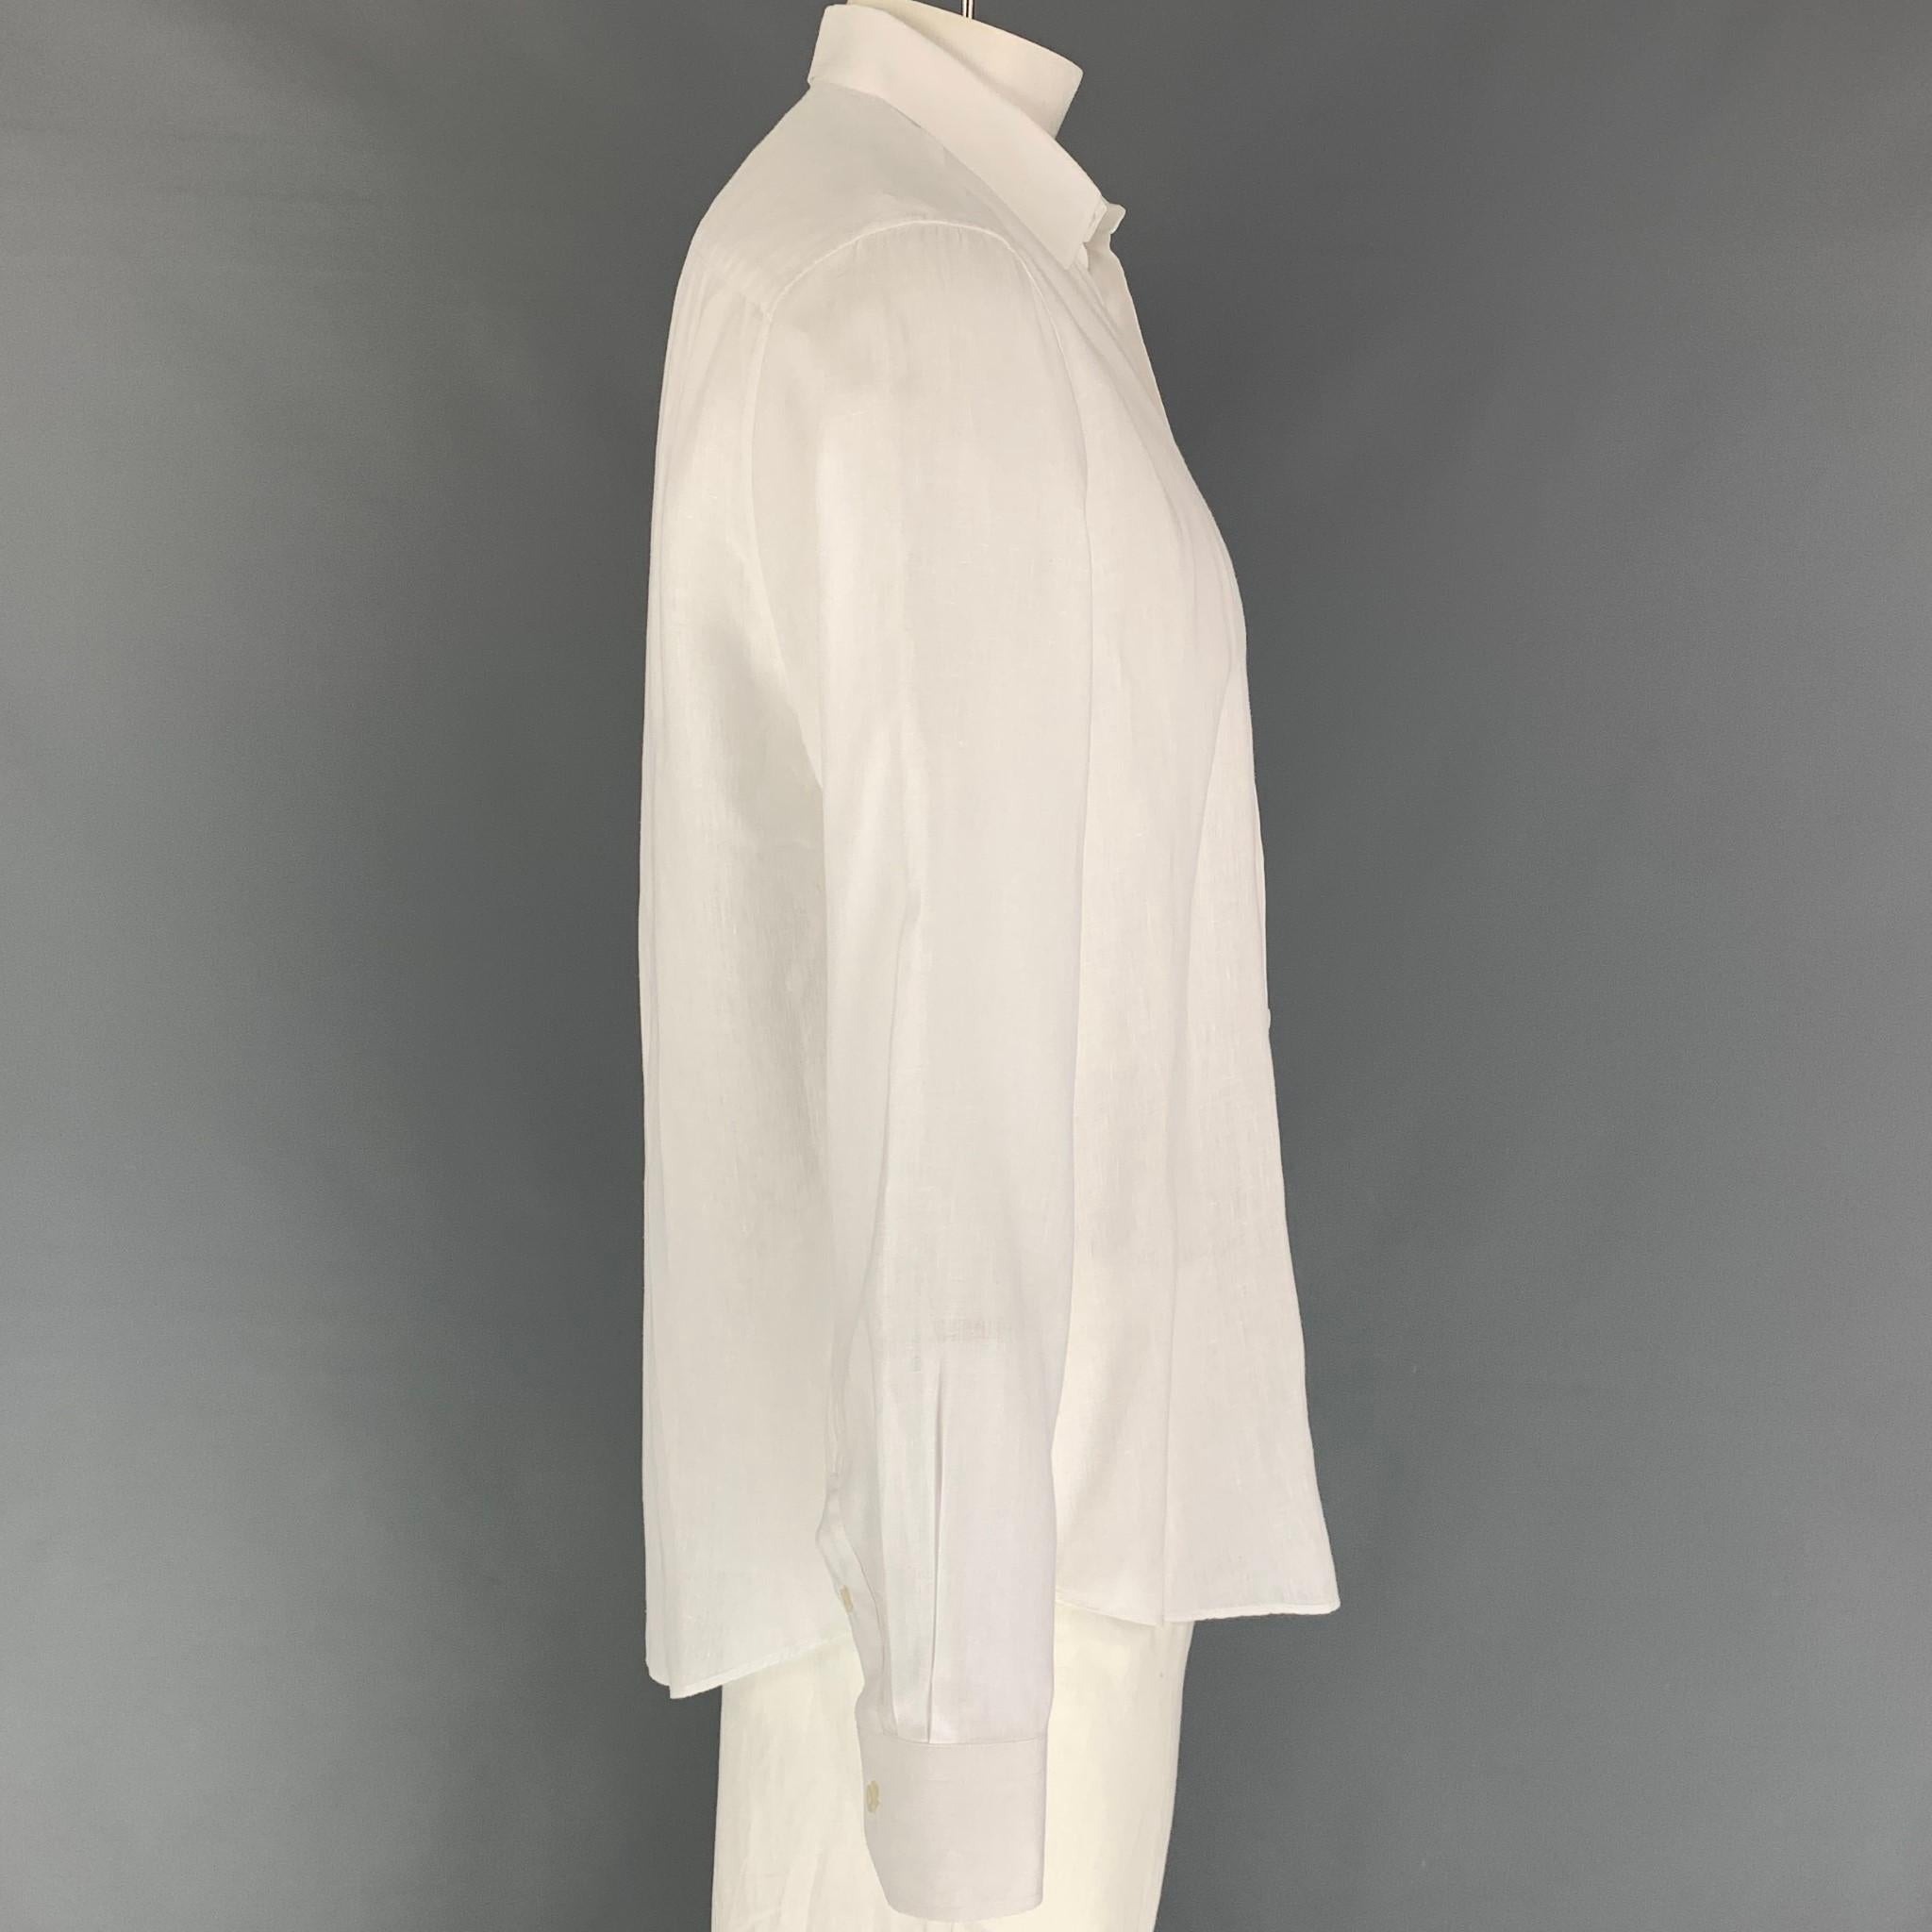 LOUIS VUITTON long sleeve shirt comes in a white linen featuring a front pocket, embroidered logo, spread collar, and a button up closure. Made in Italy. 

Excellent Pre-Owned Condition.
Marked: XL

Measurements:

Shoulder: 18 in.
Chest: 46